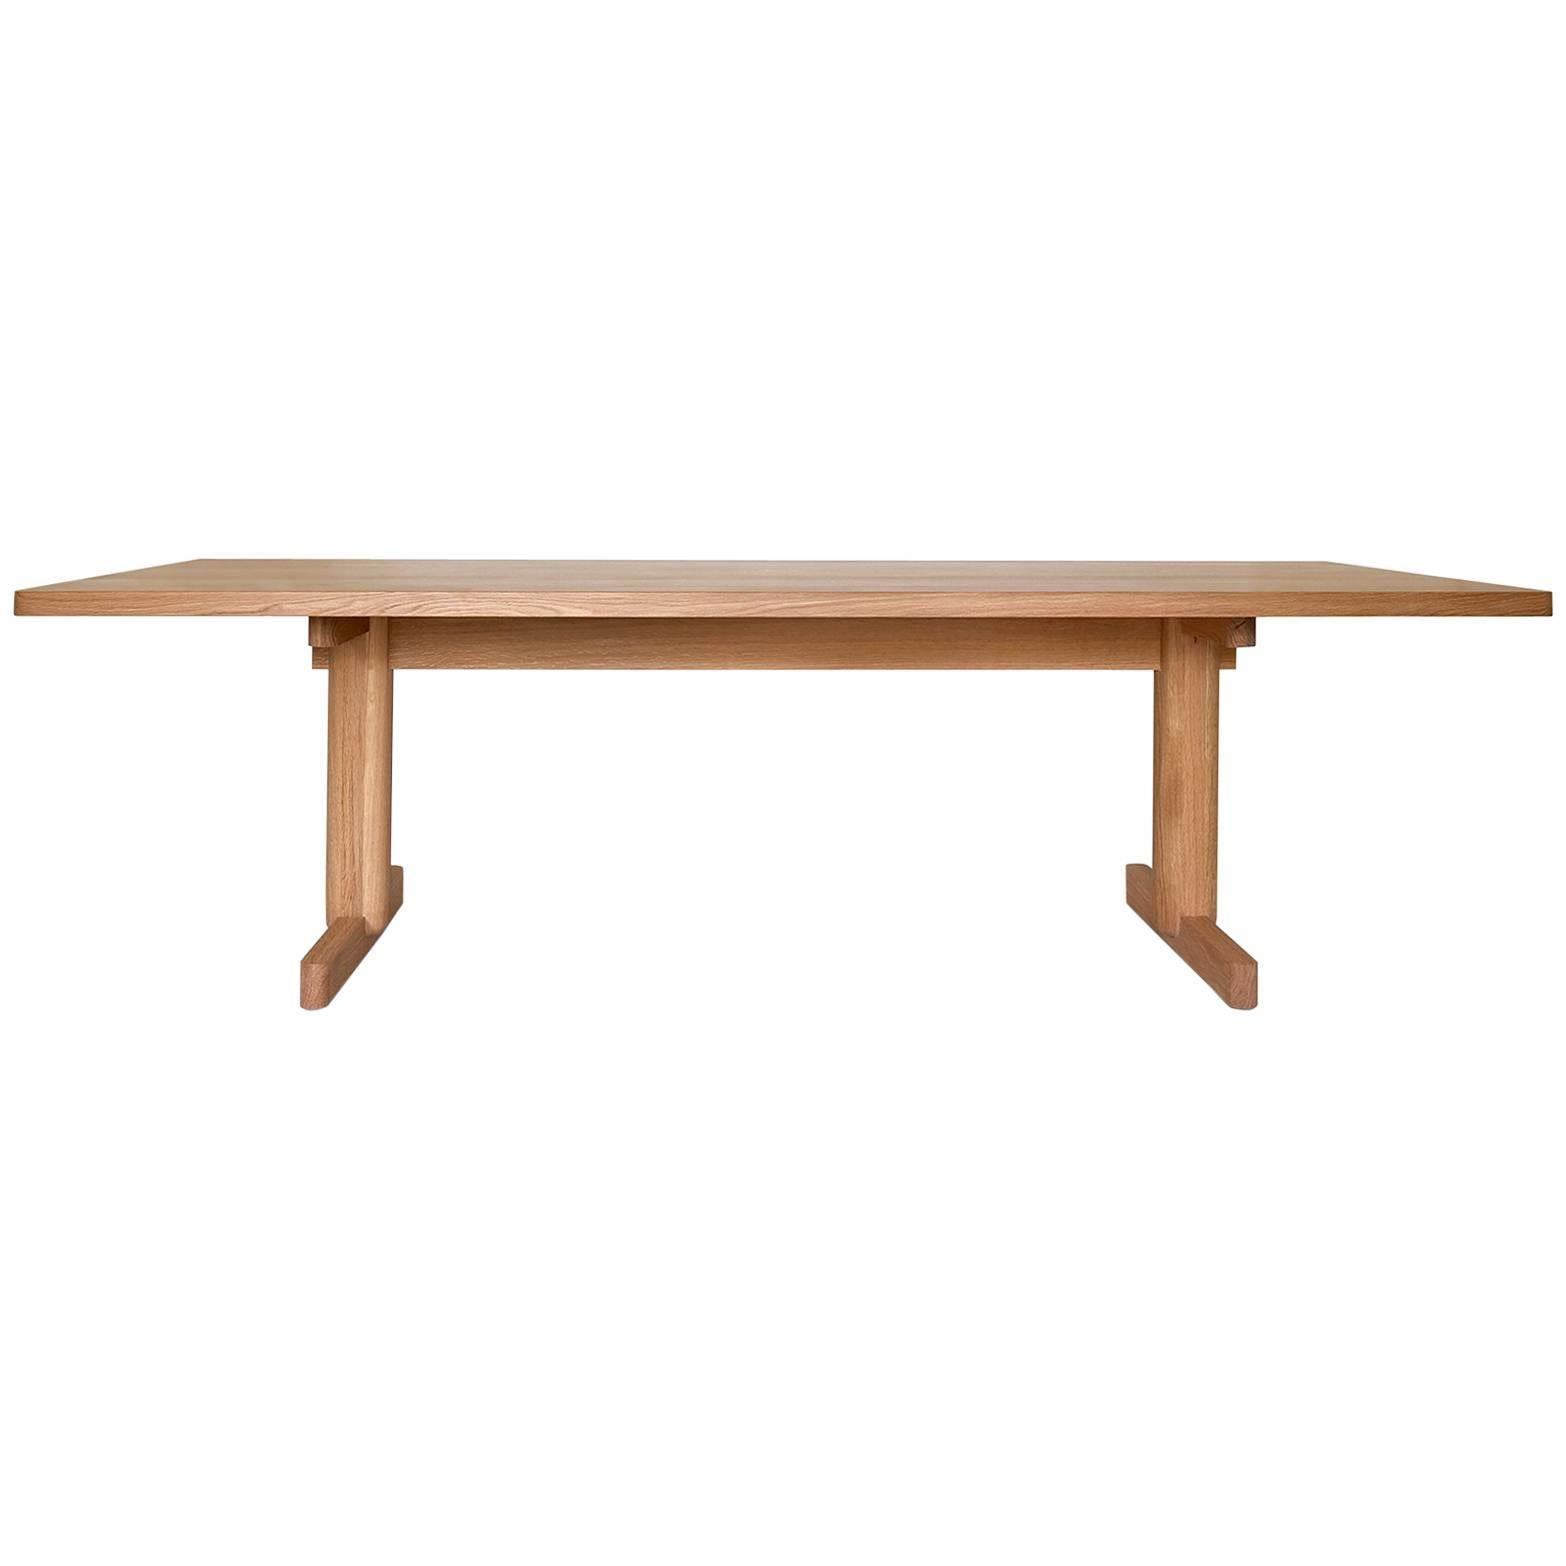 Olmsted Dining Table by Fern For Sale